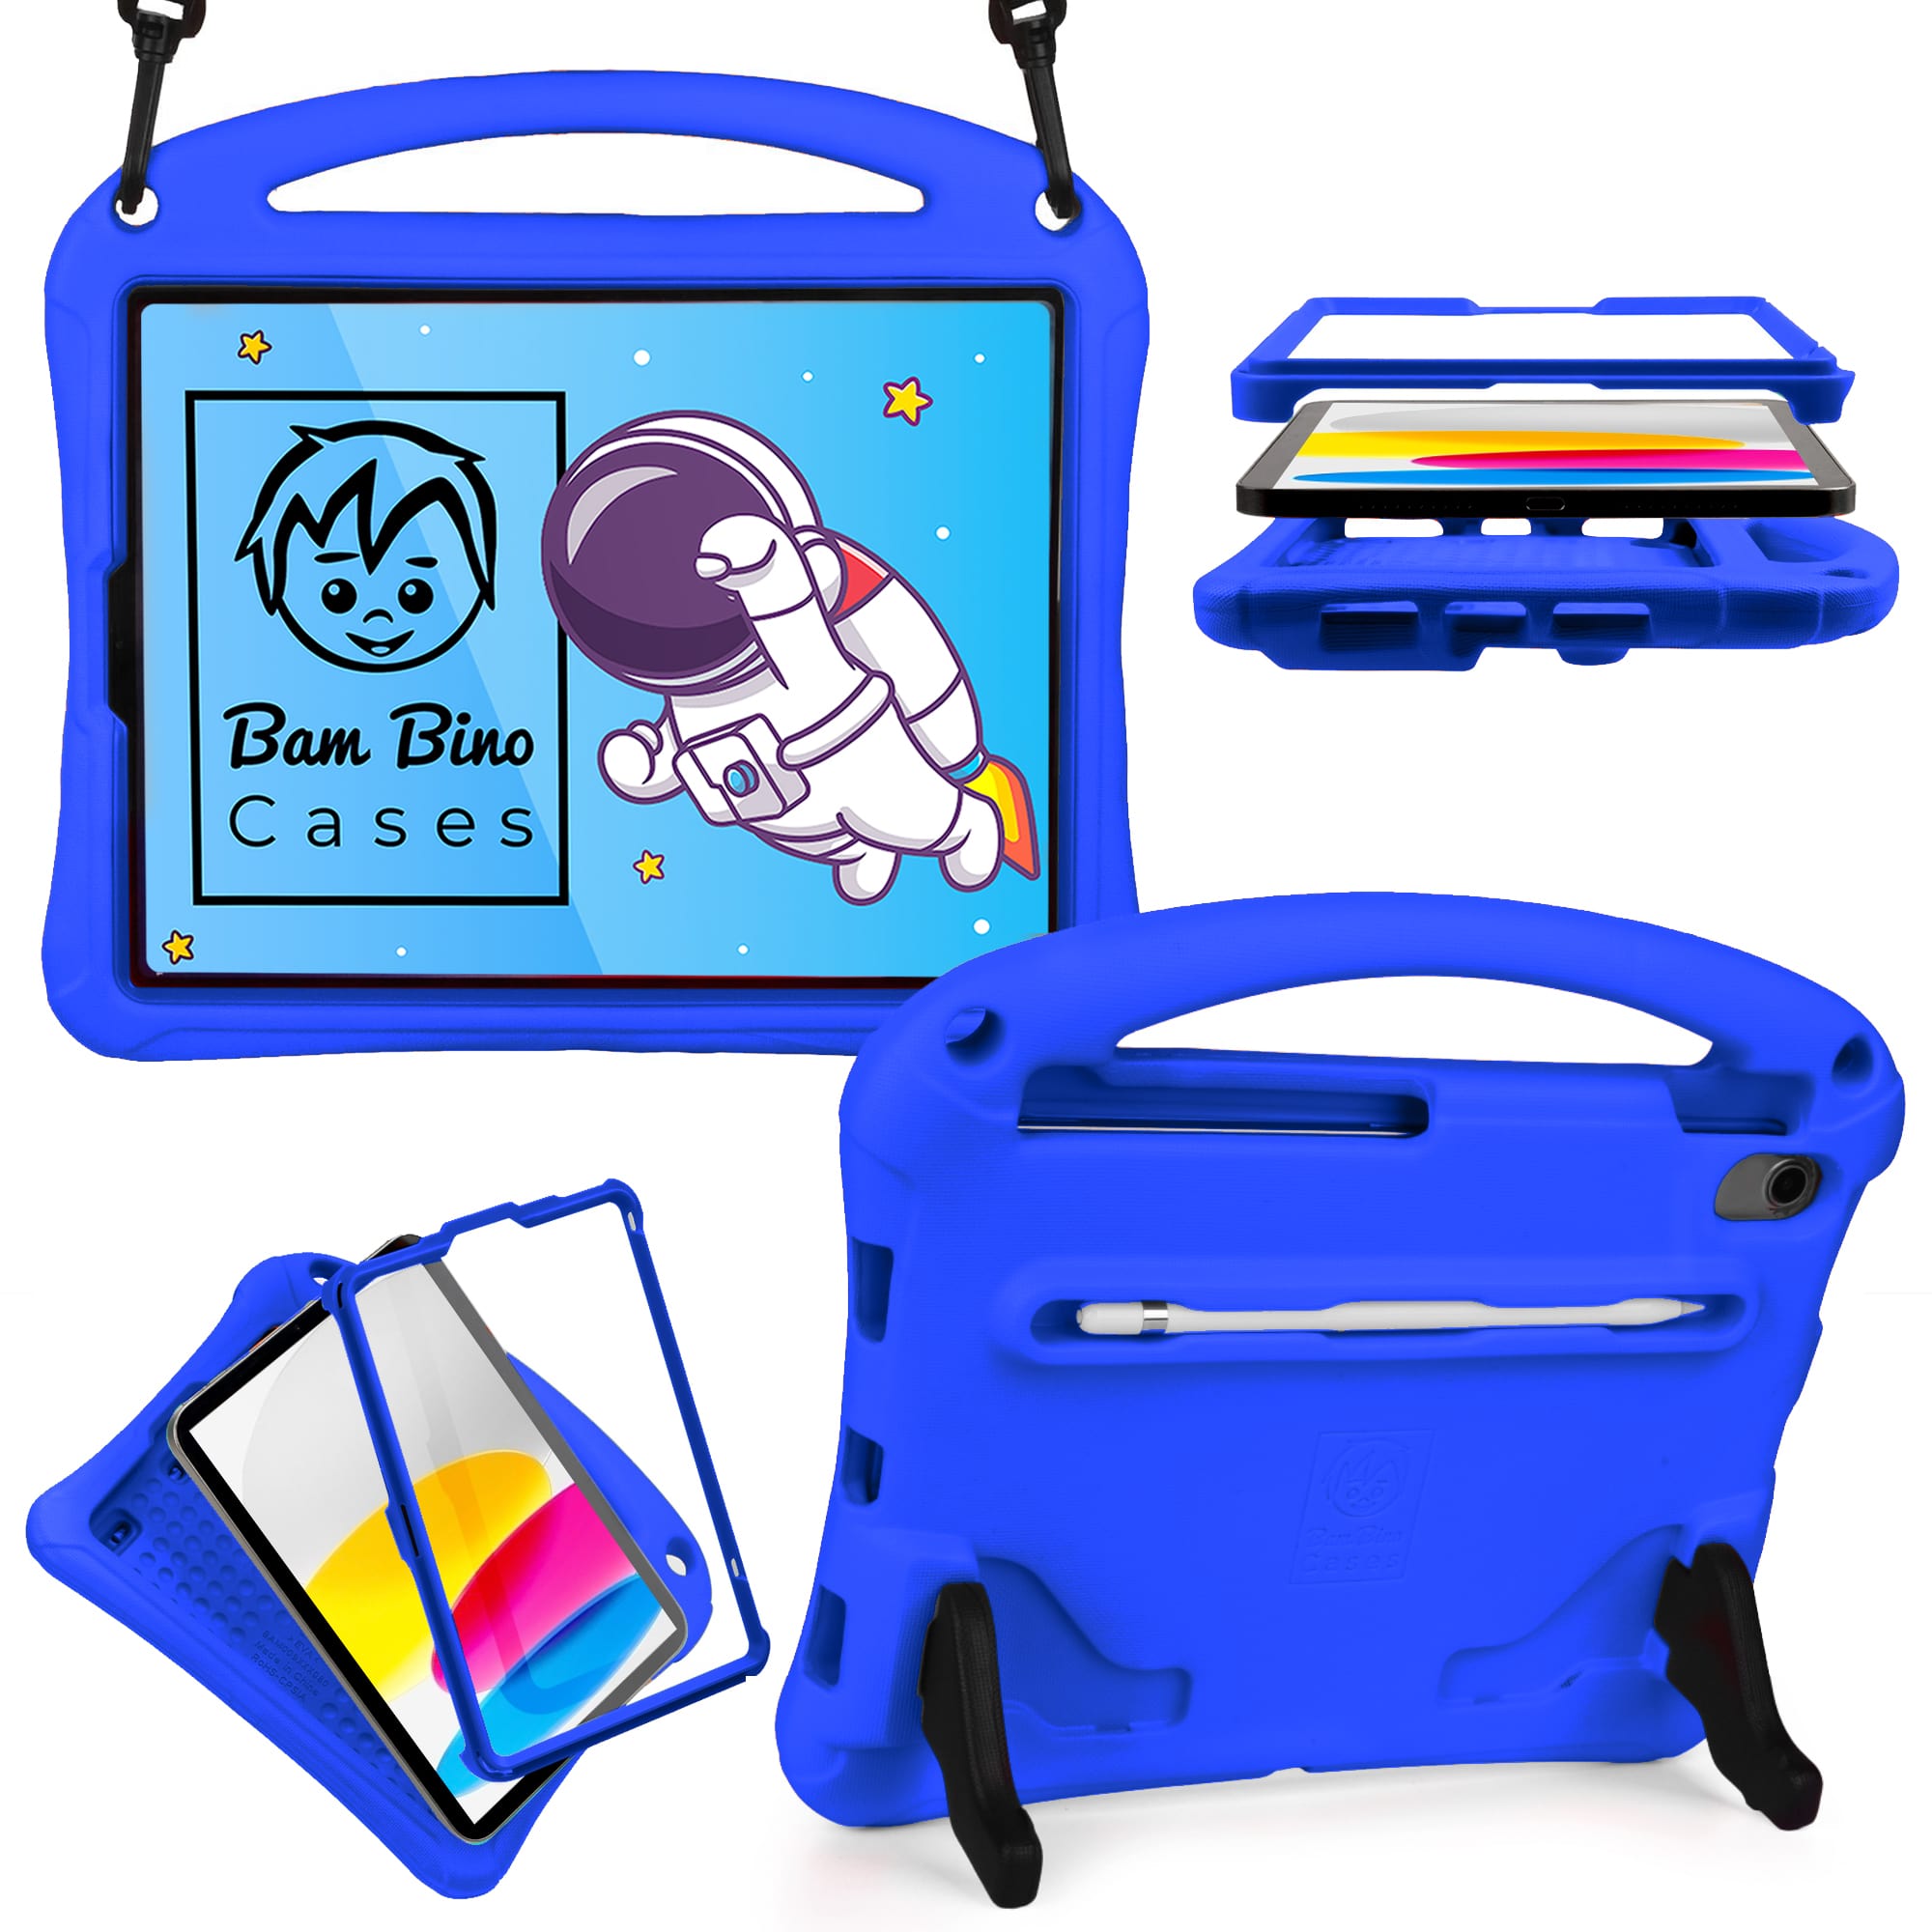 Bam Bino Space Suit Super Rugged Kids case with Screen Guard for 9.7" iPad 6th / 5th Gen, iPad Pro 9.7, iPad Air 2 / Air 1